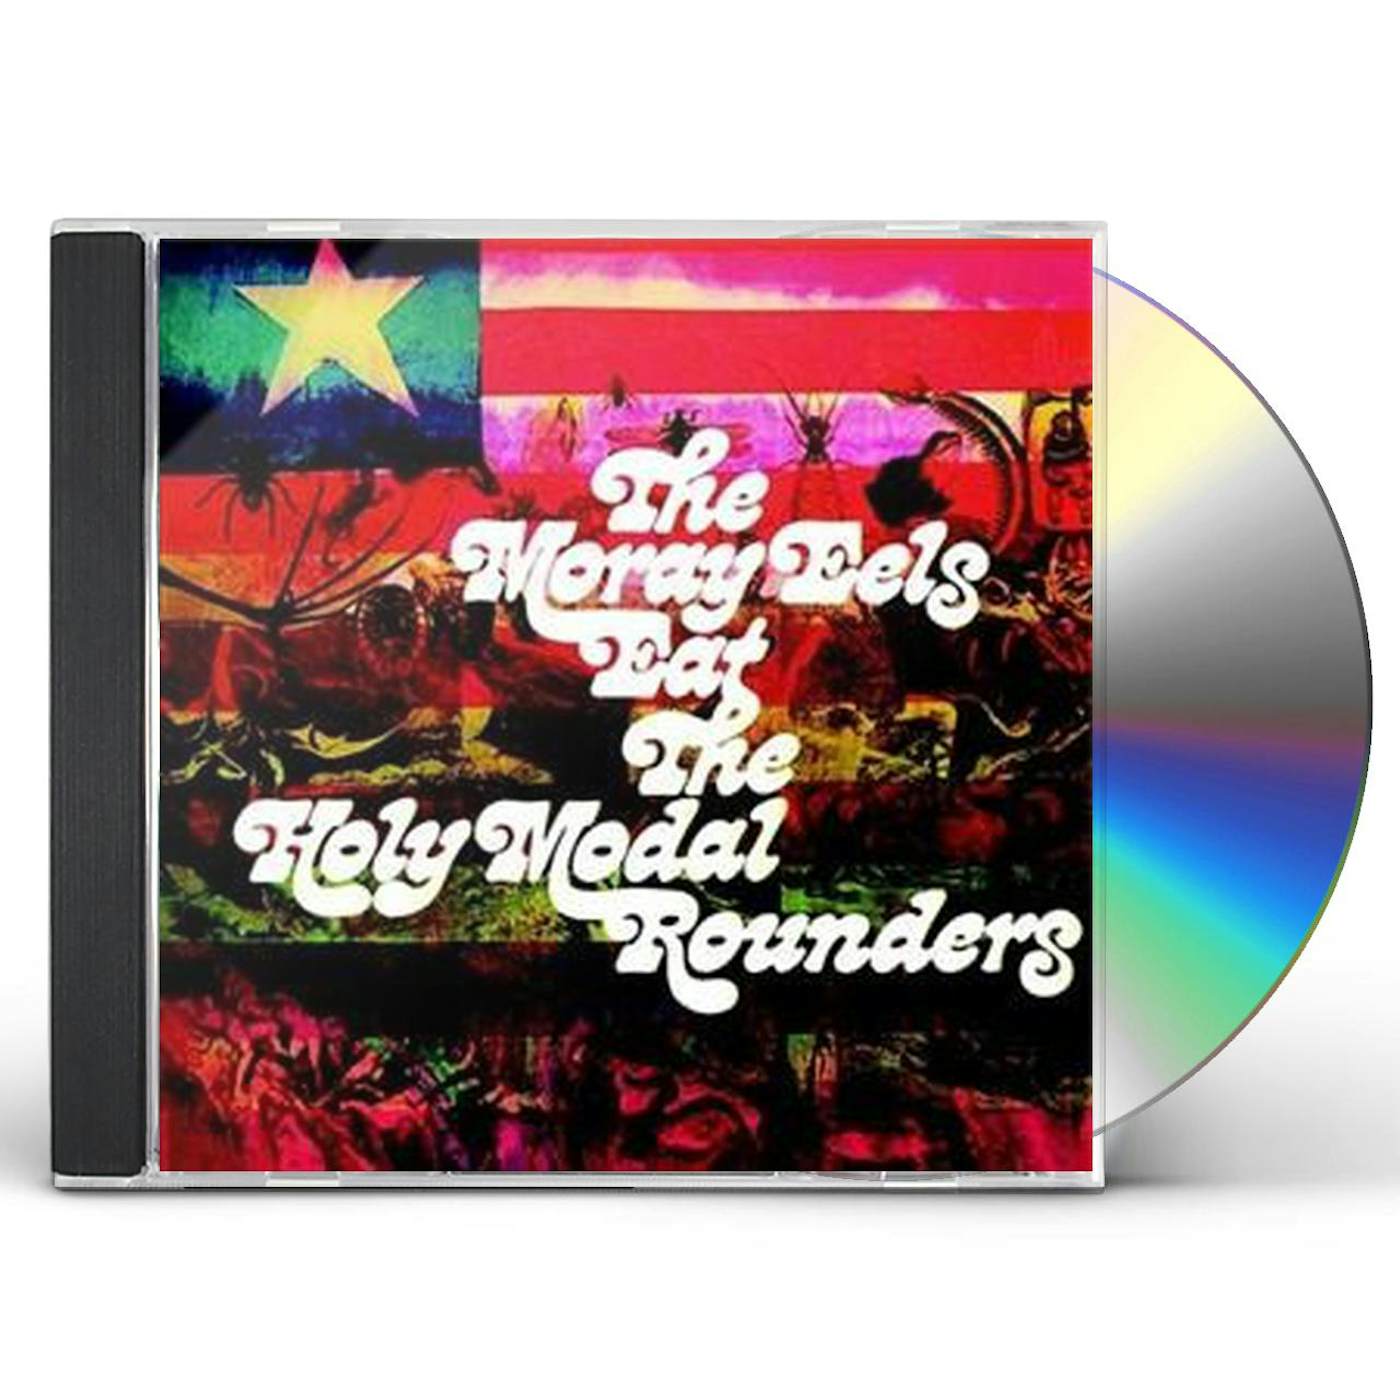 The Holy Modal Rounders MORAY EELS EAT (2018 REISSUE) CD